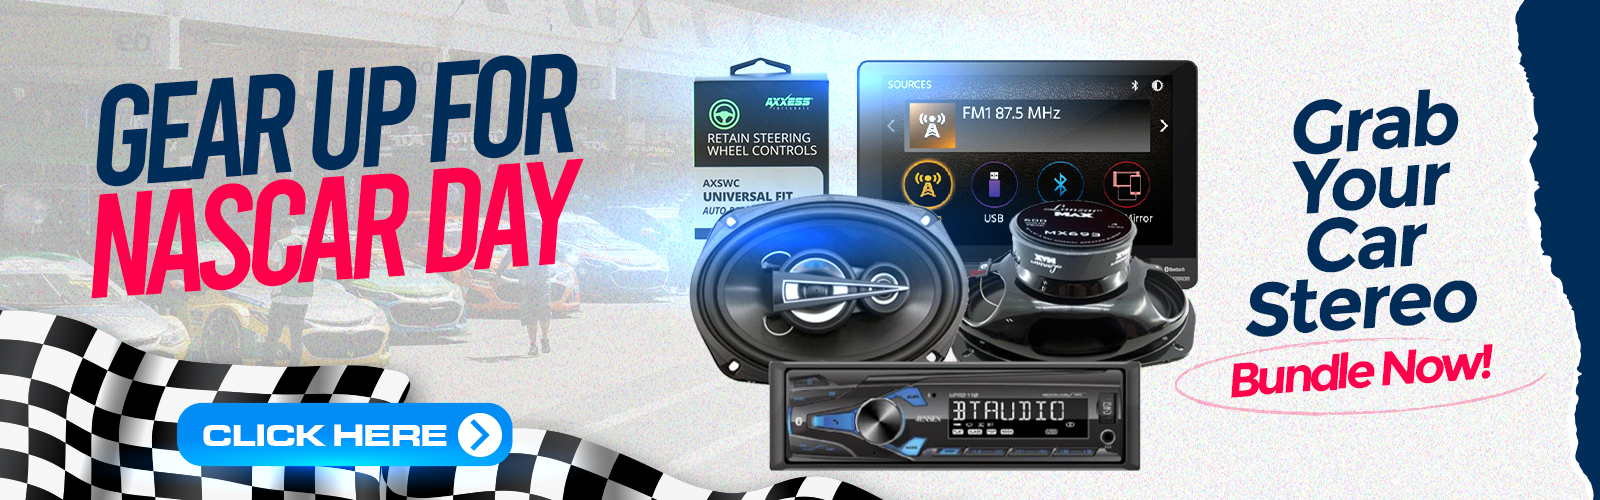 Gear Up for NASCAR Day: Grab Your Car Stereo Bundle Now!